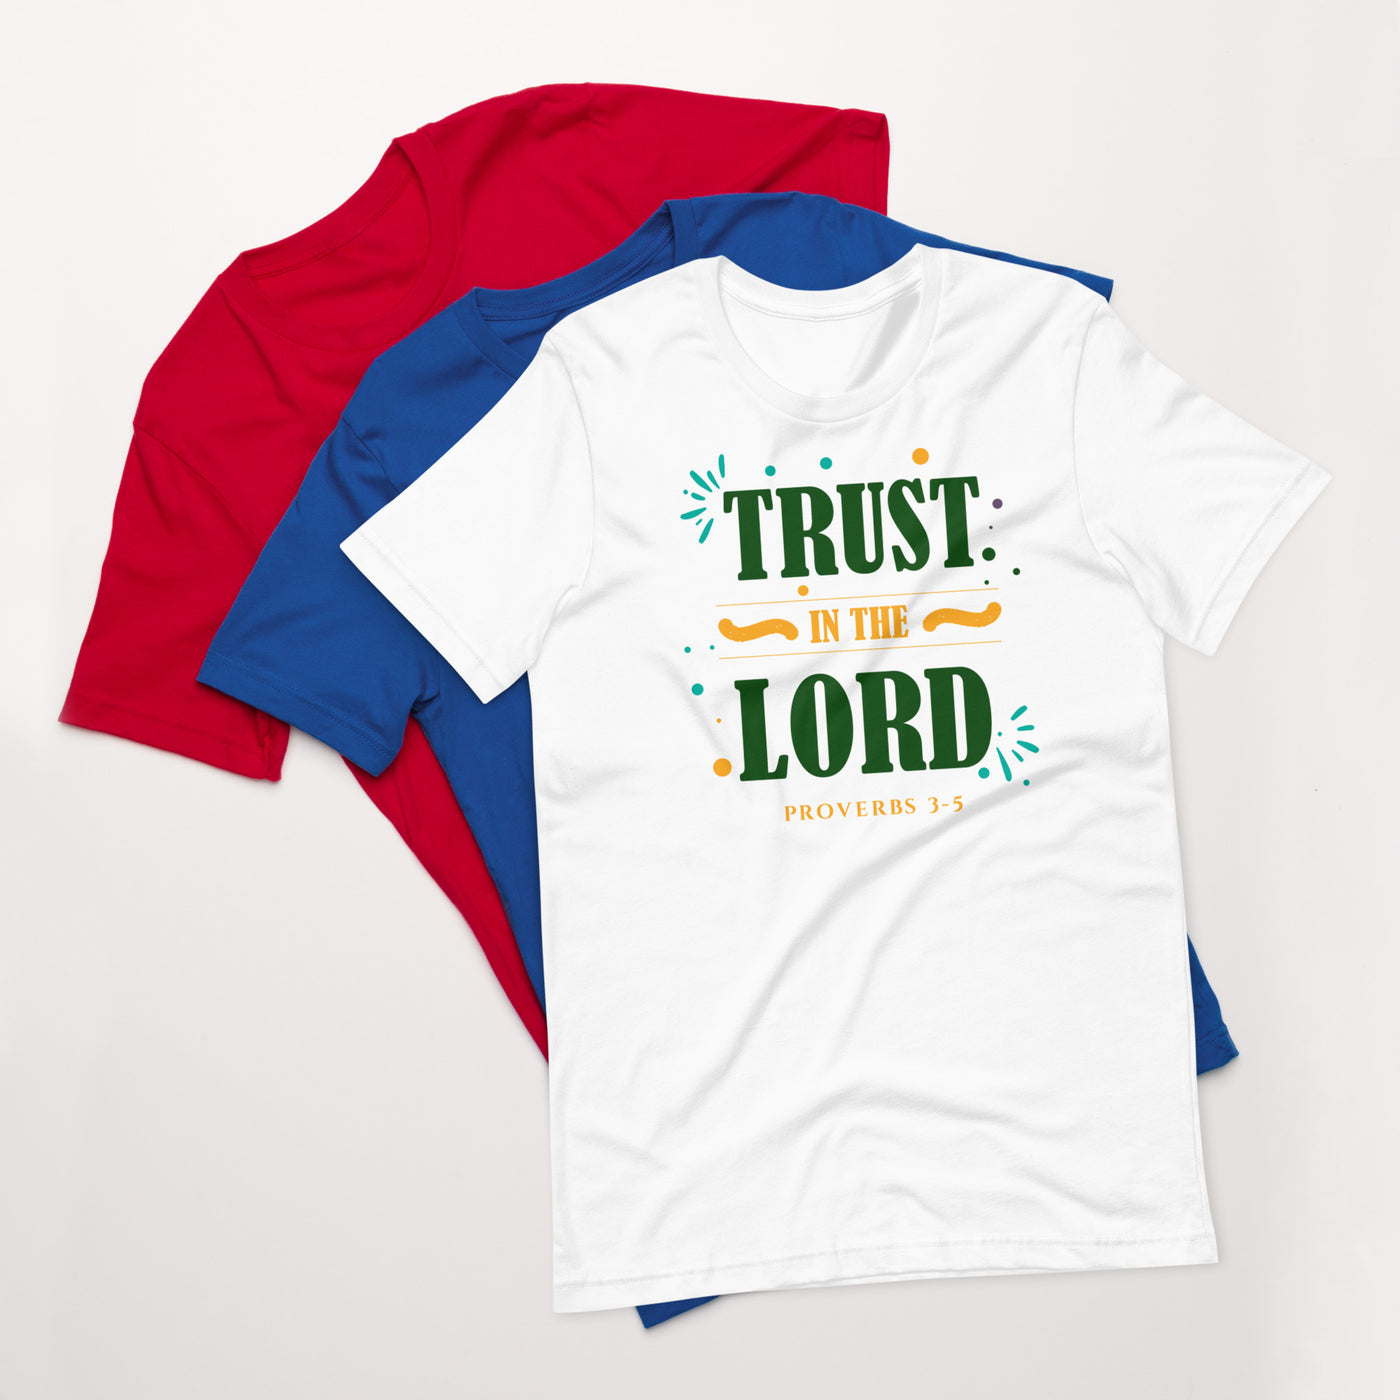 F&H Christian Trust in the Lord Proverbs 3:5 Men's T-shirt